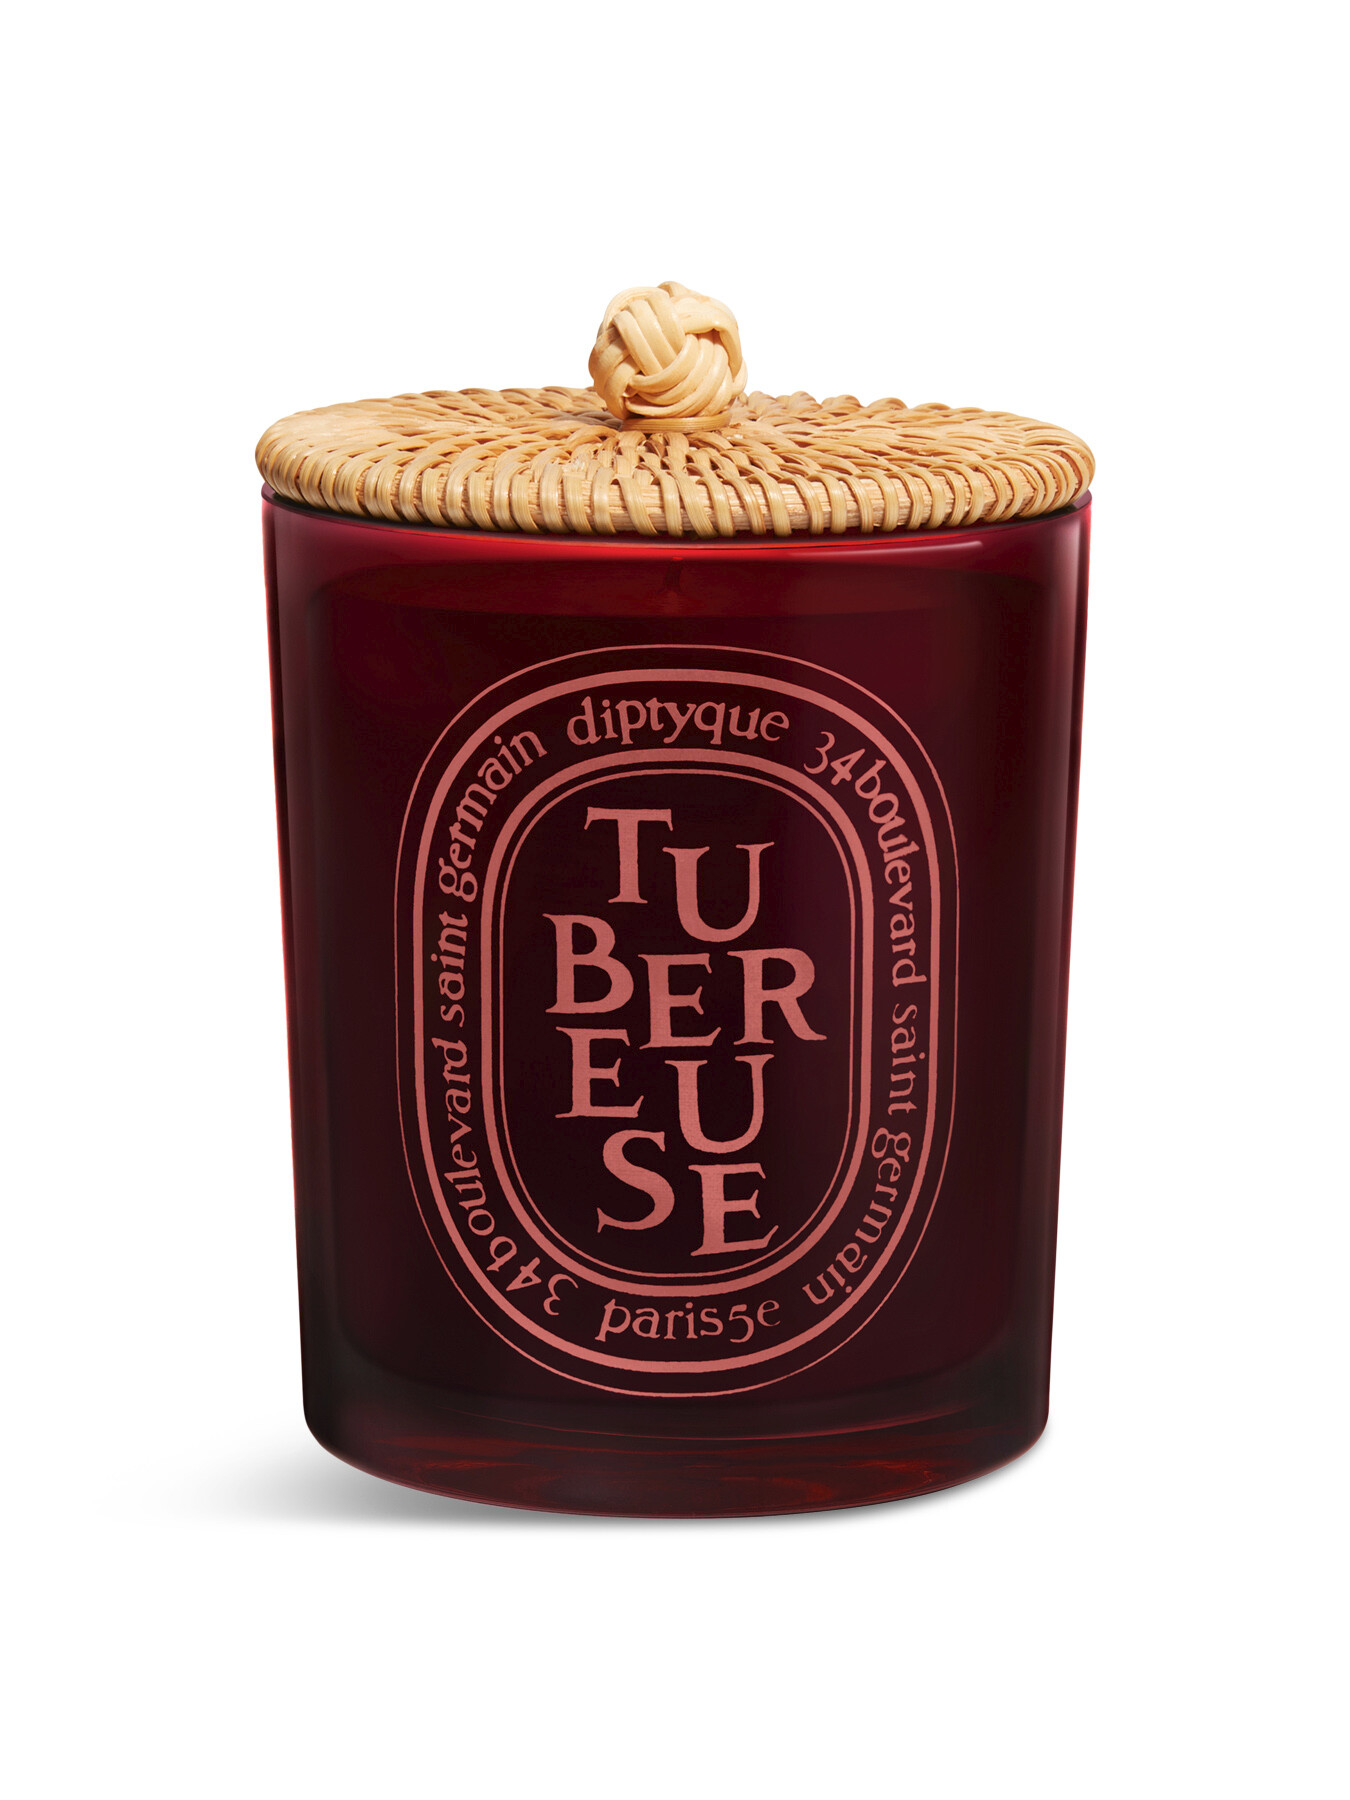 Diptyque Tubereuse Candle 300g With Lid Limited Edition In Red